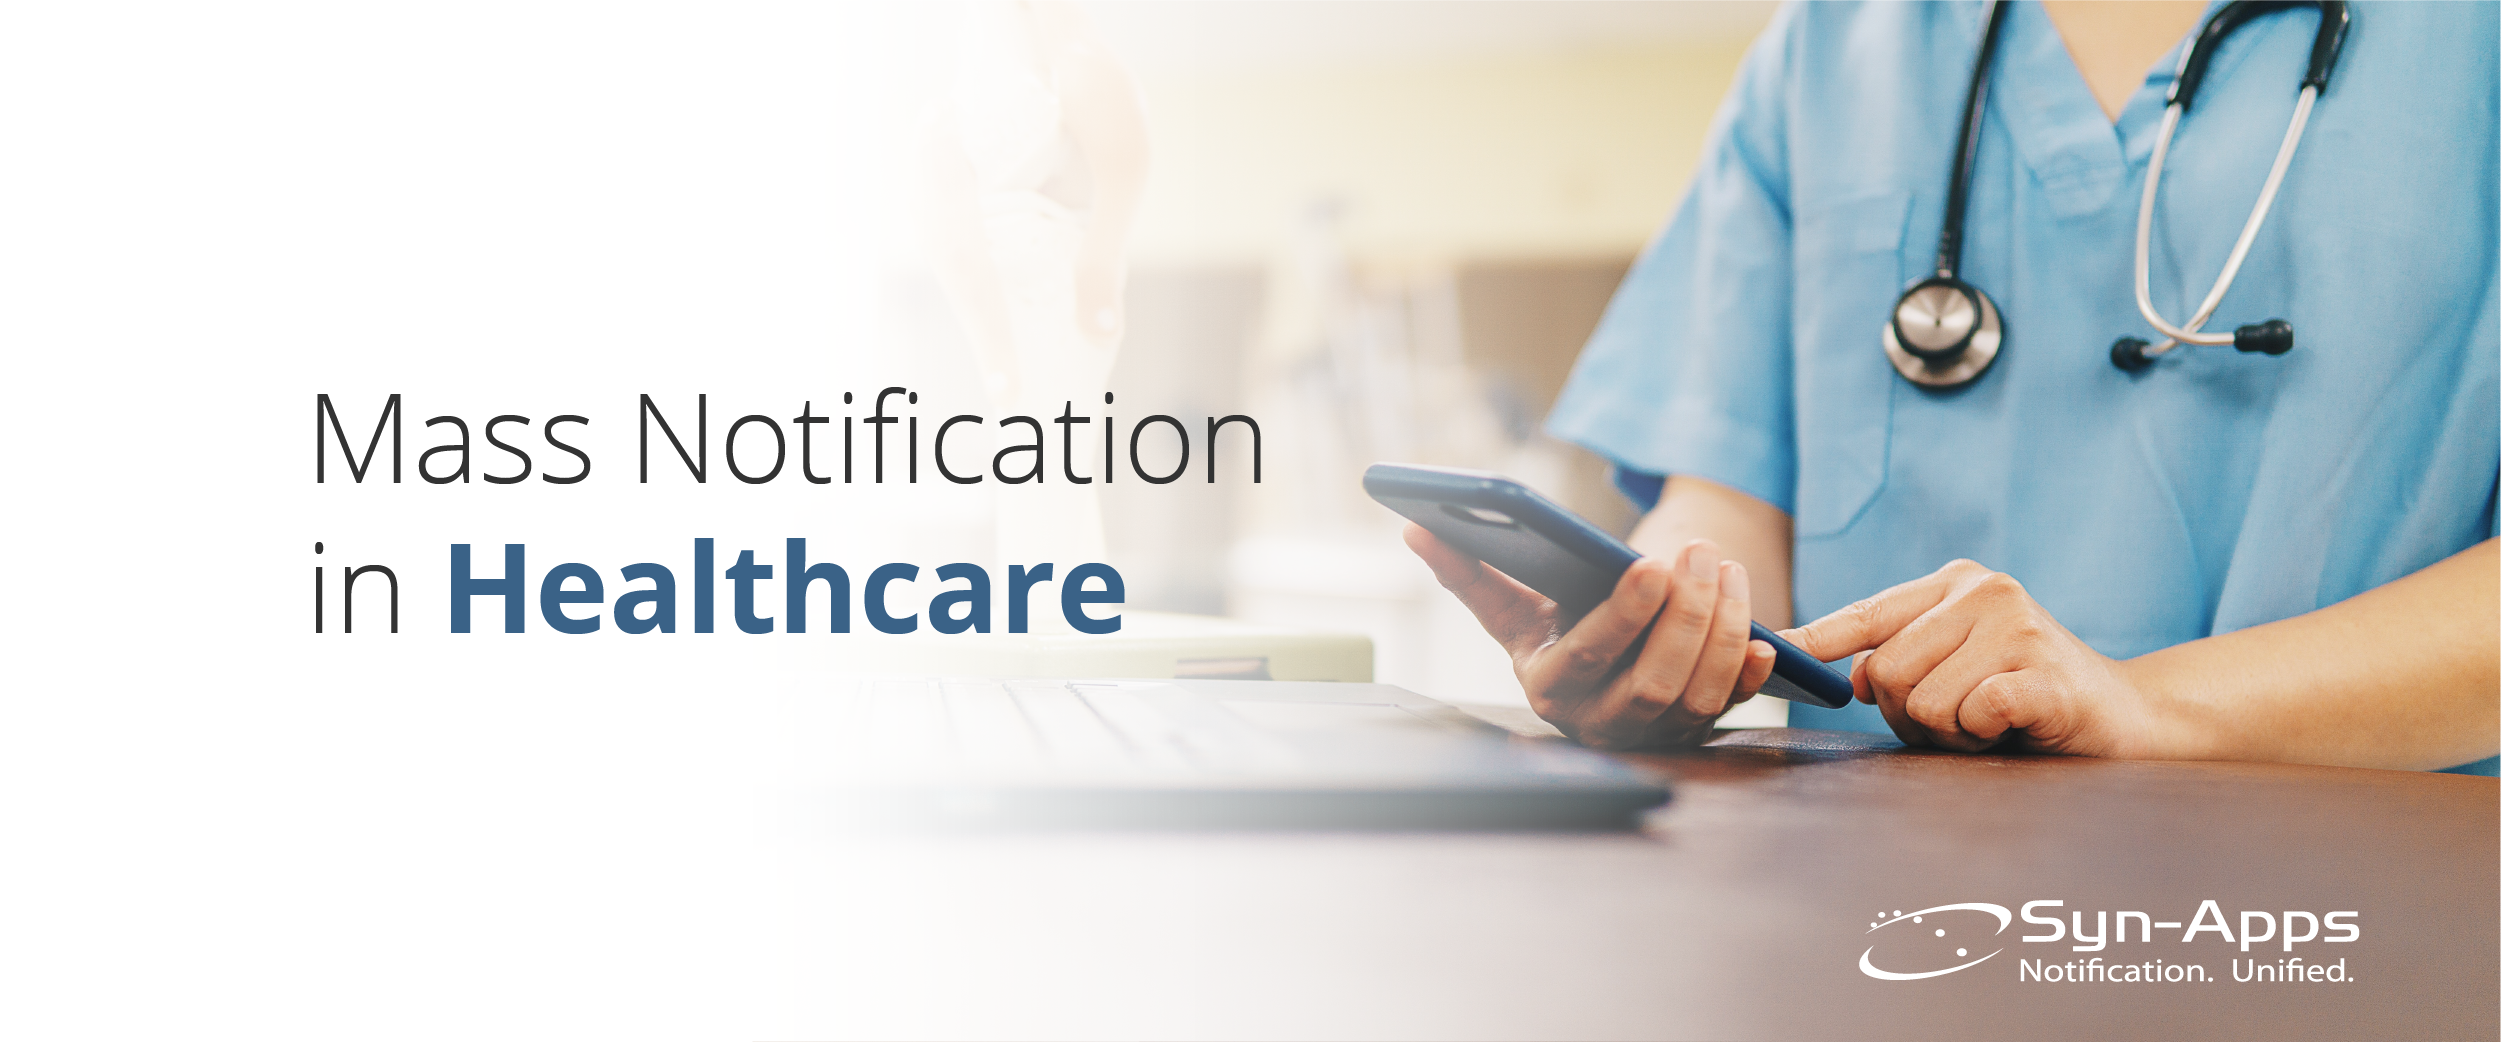 Mass Notification in Healthcare